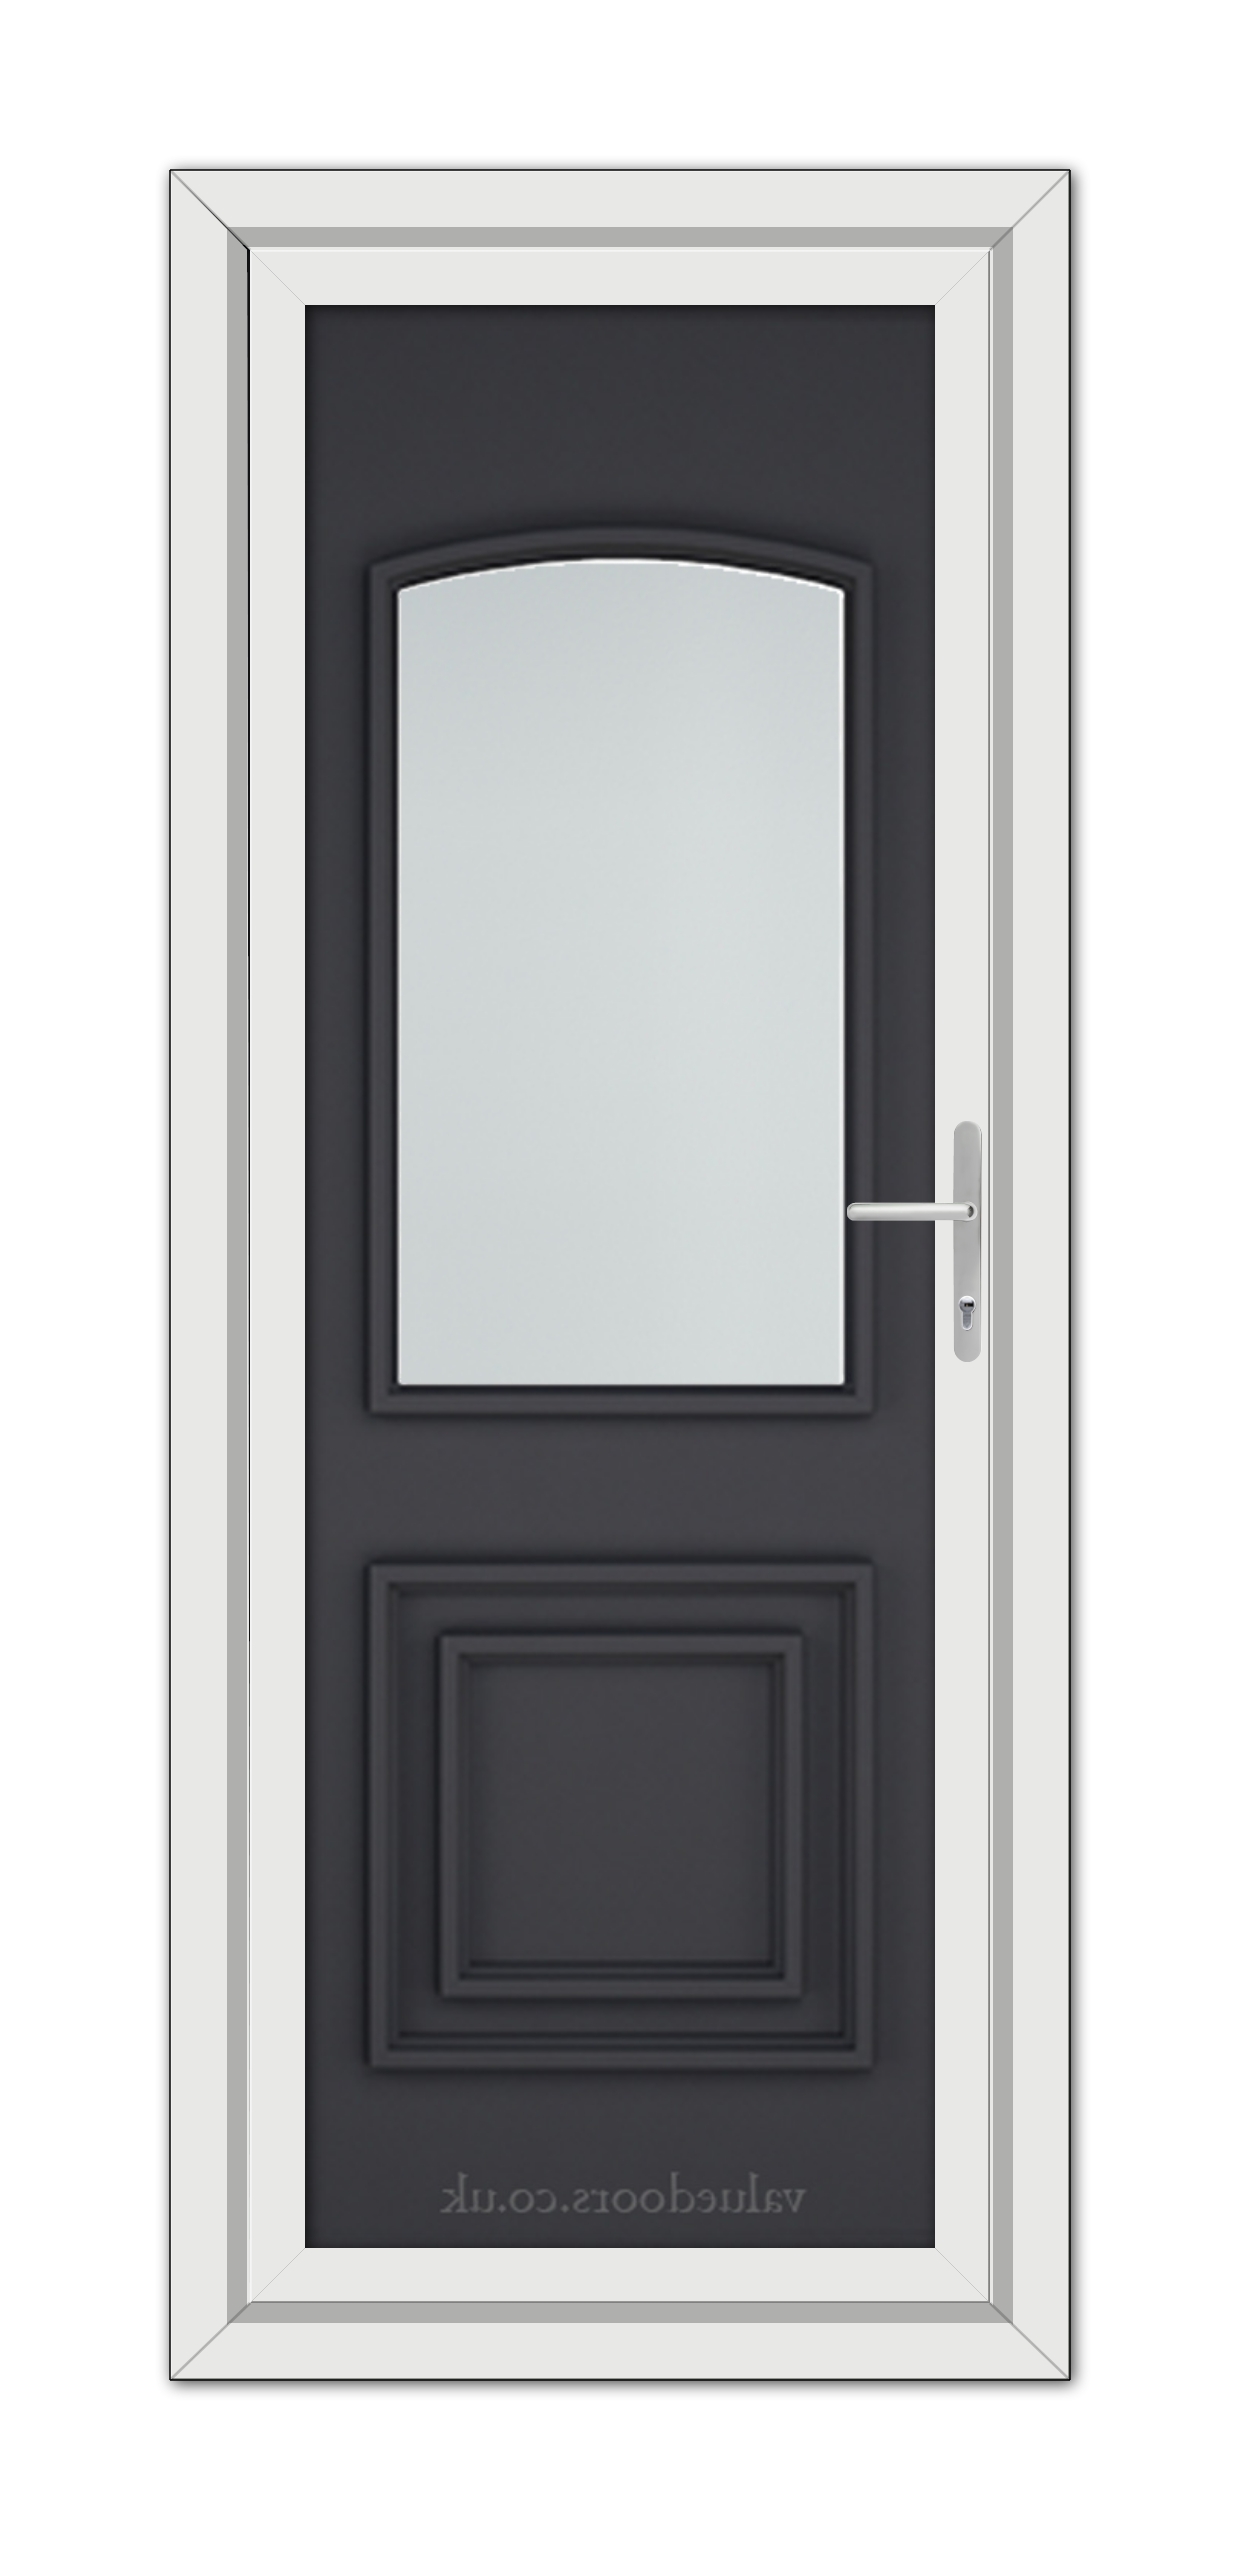 A modern Grey Balmoral Classic uPVC door with a vertical rectangular window, framed in white and equipped with a silver handle on the right side.